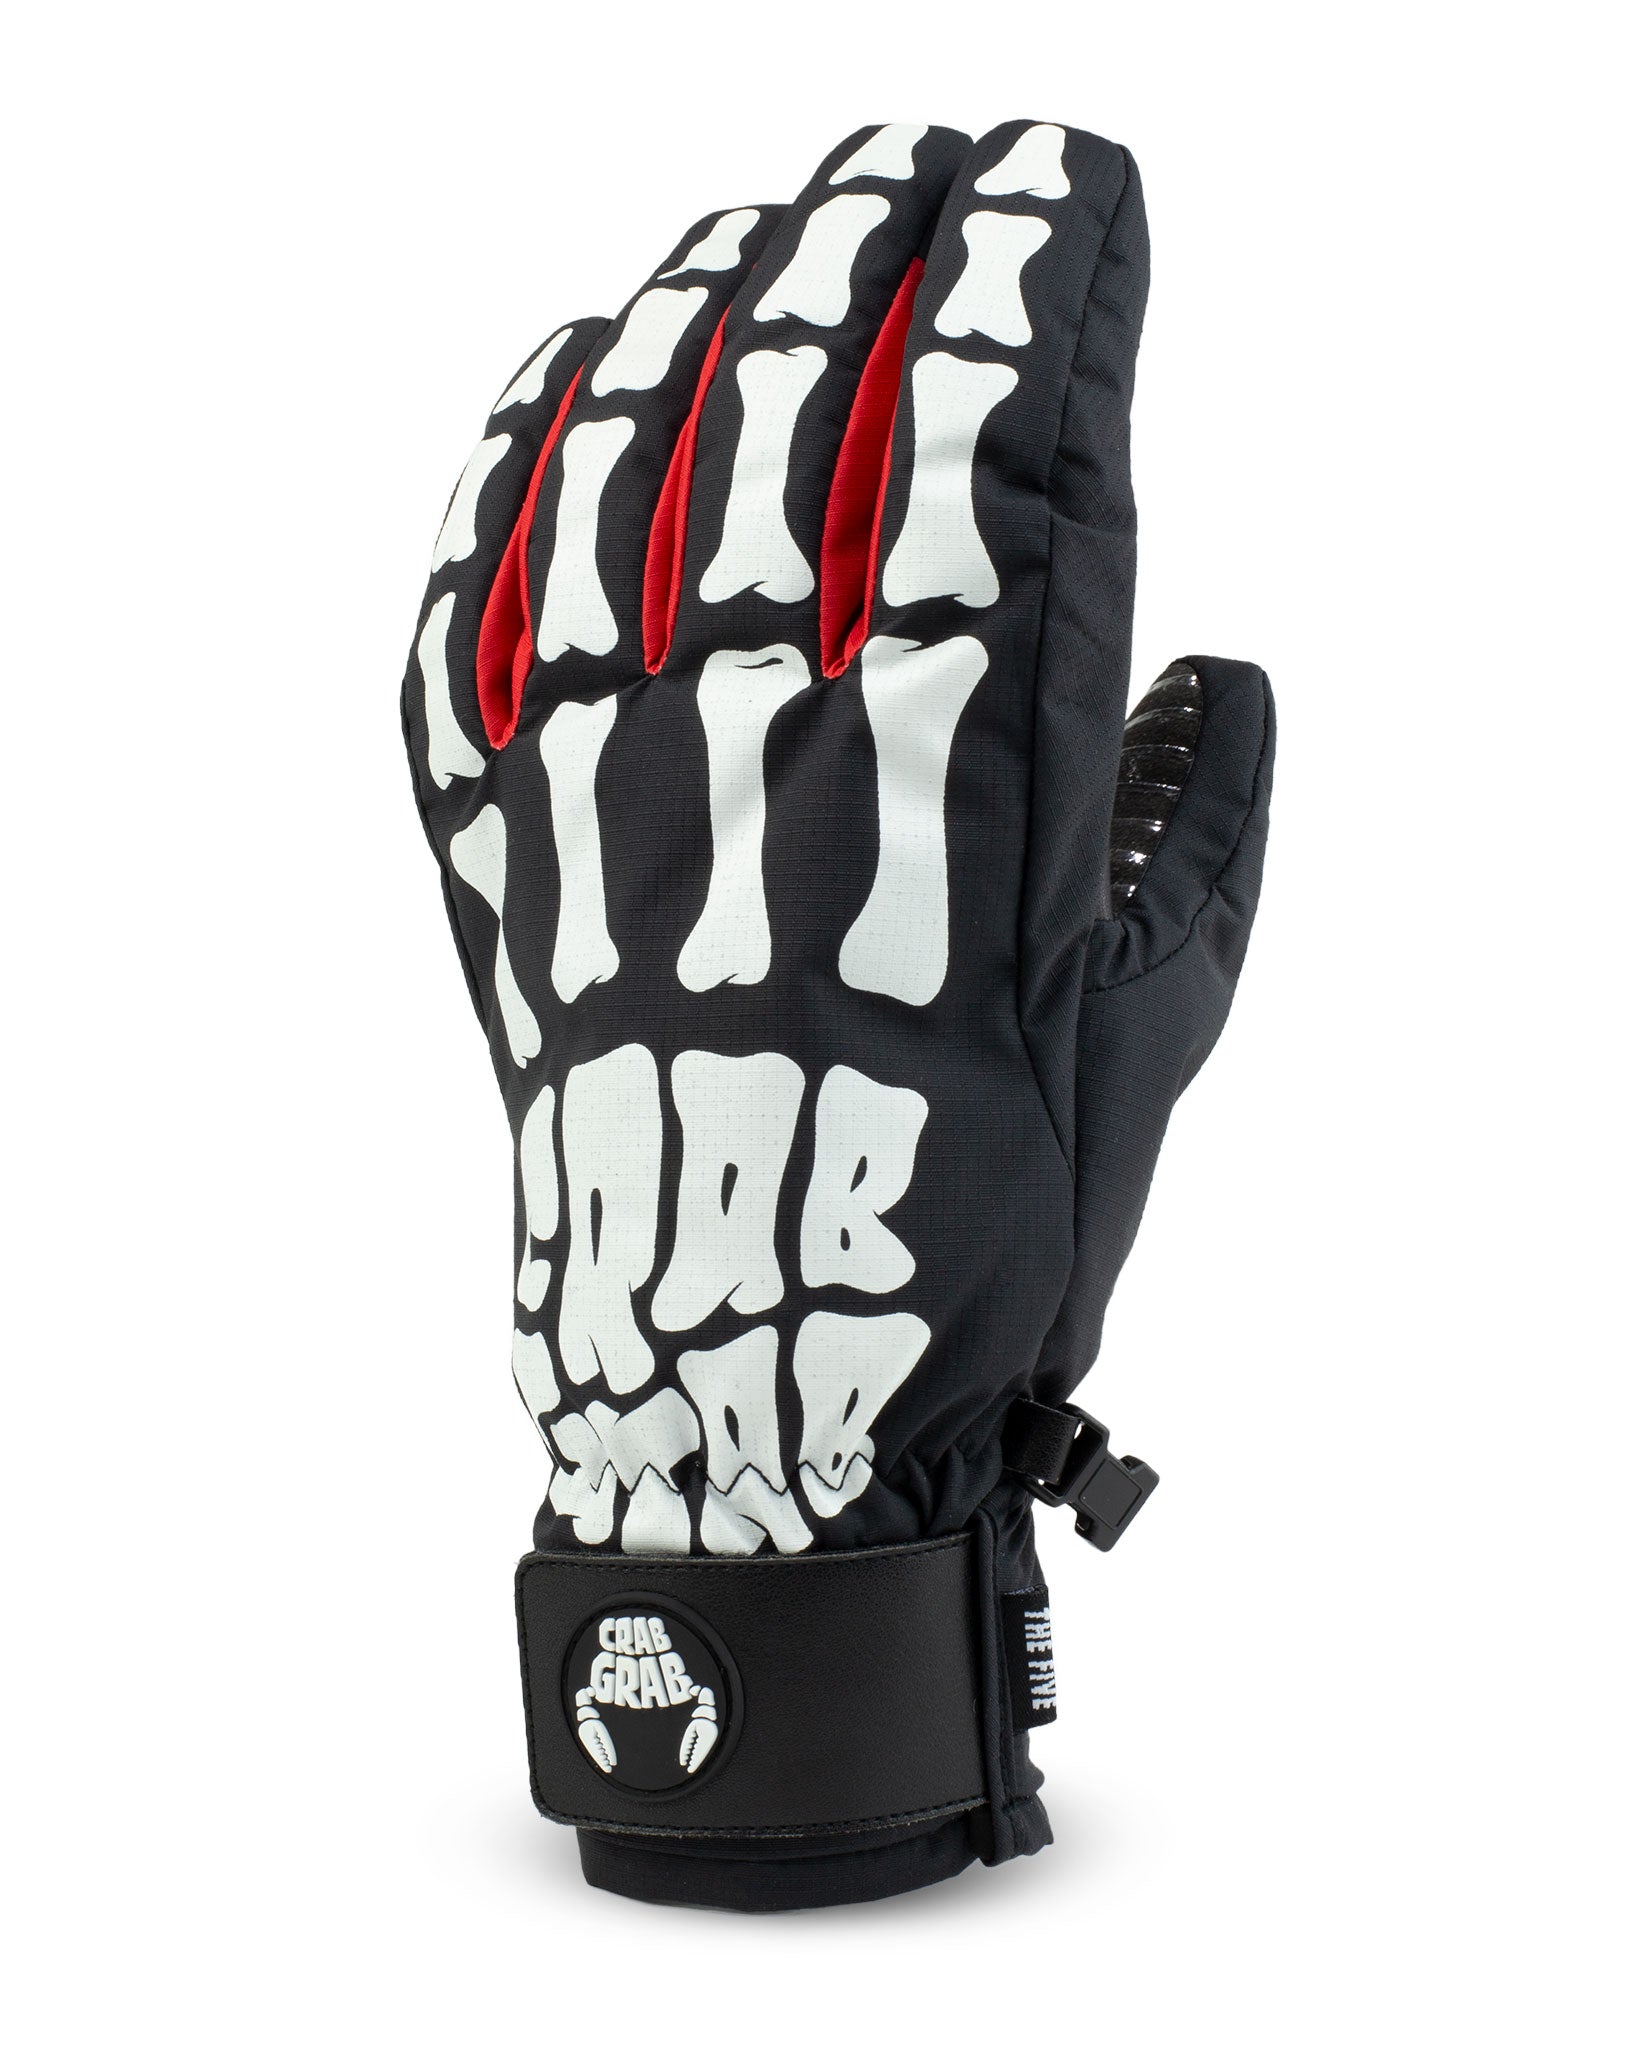 Crab Grab Punch Mitt Gloves (navy and red)